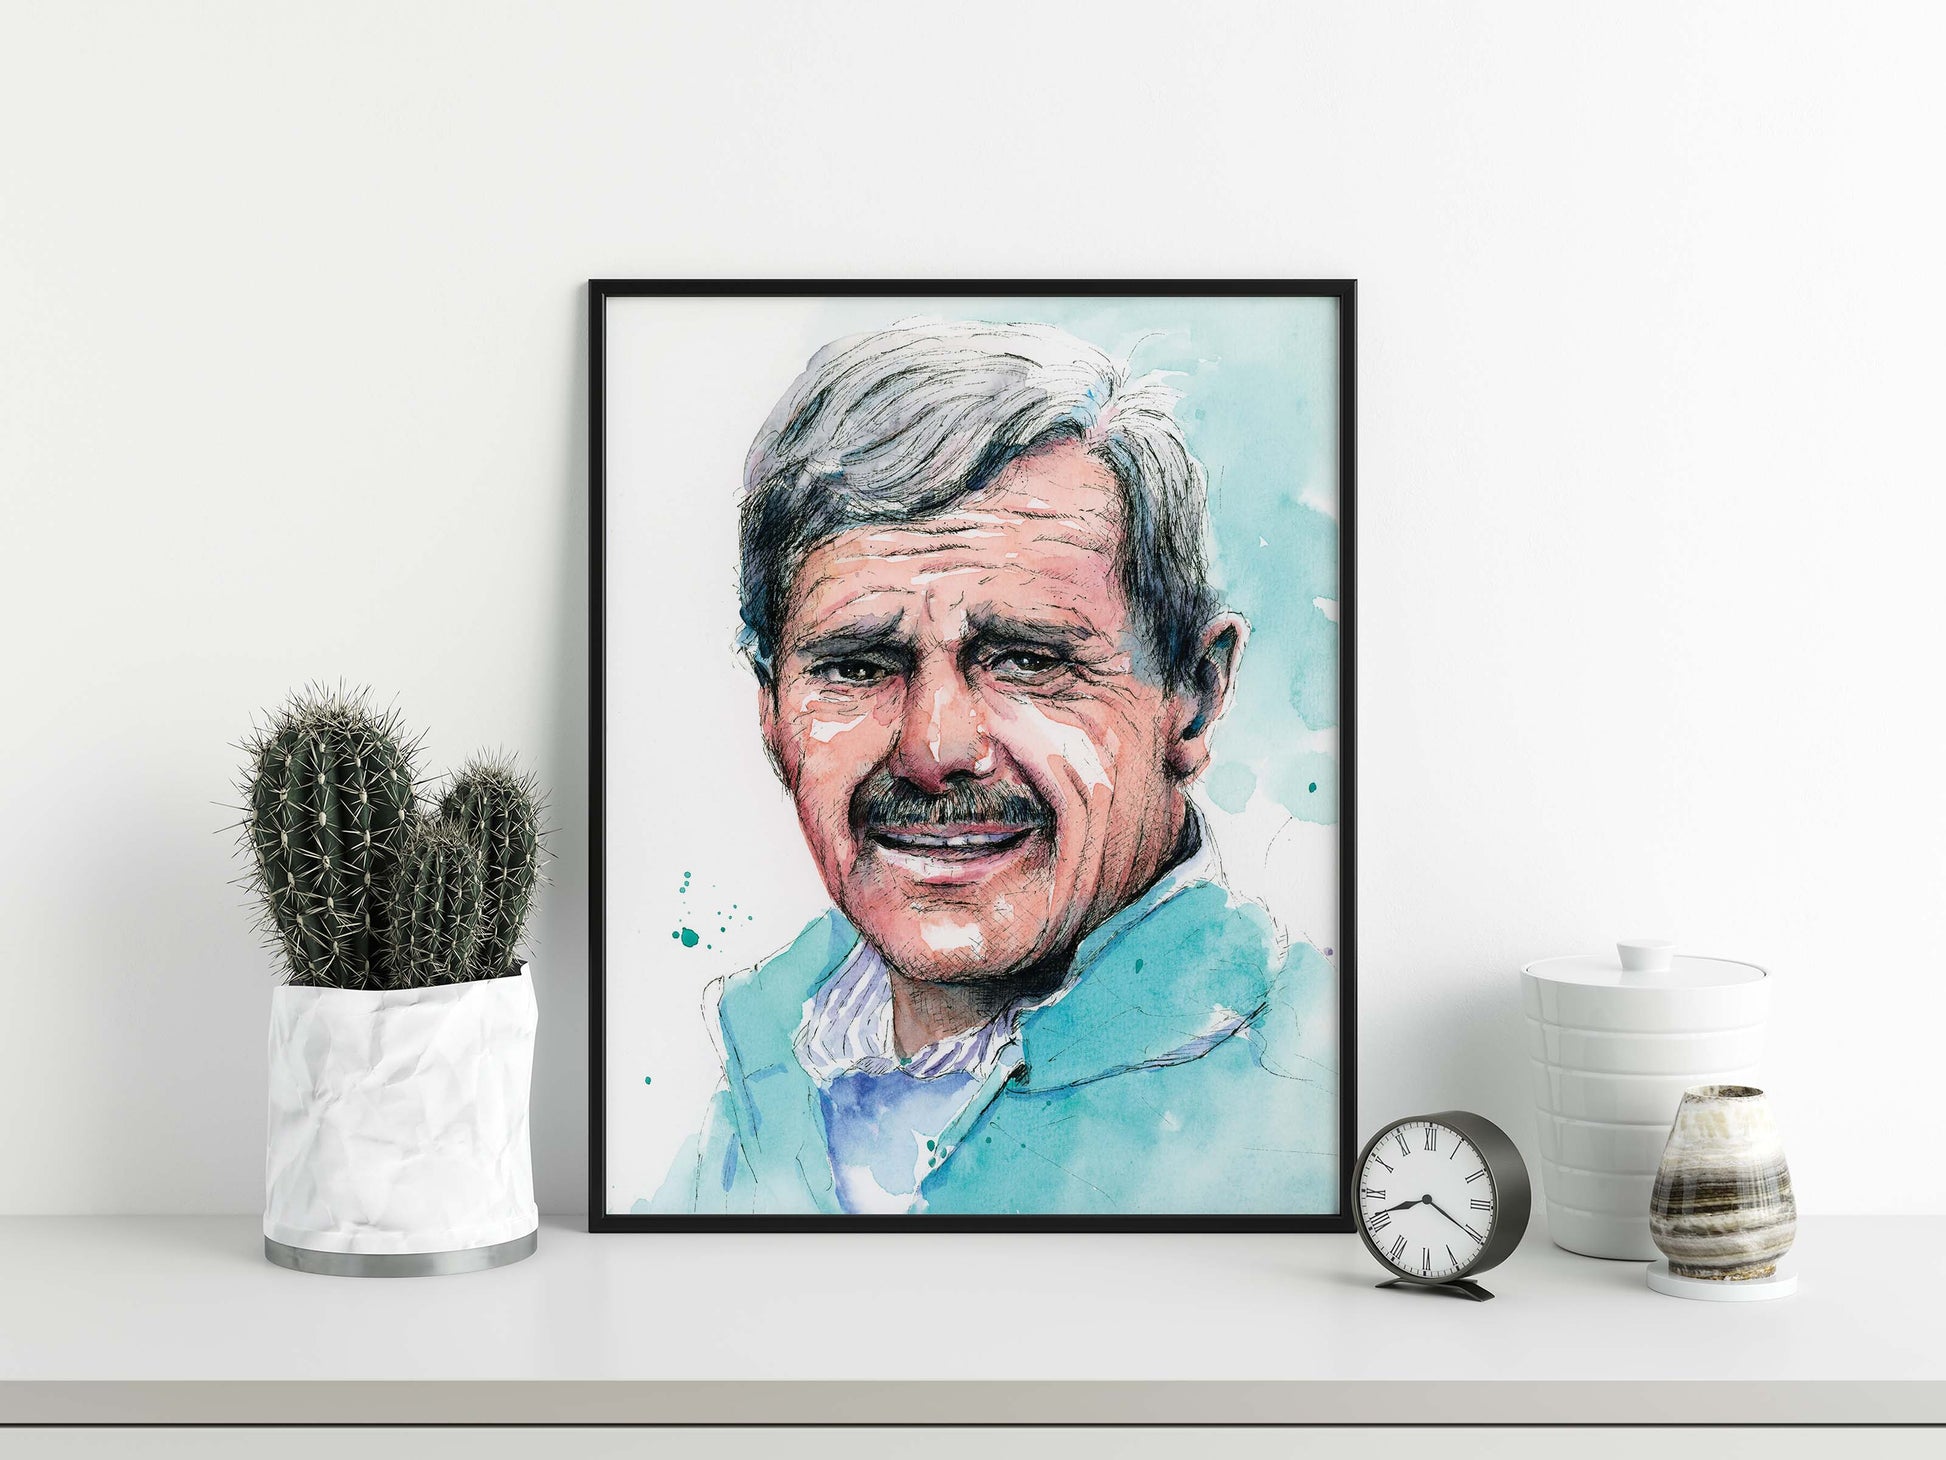 A smiling face portrait poster of a man wearing blue in watercolor in black frame